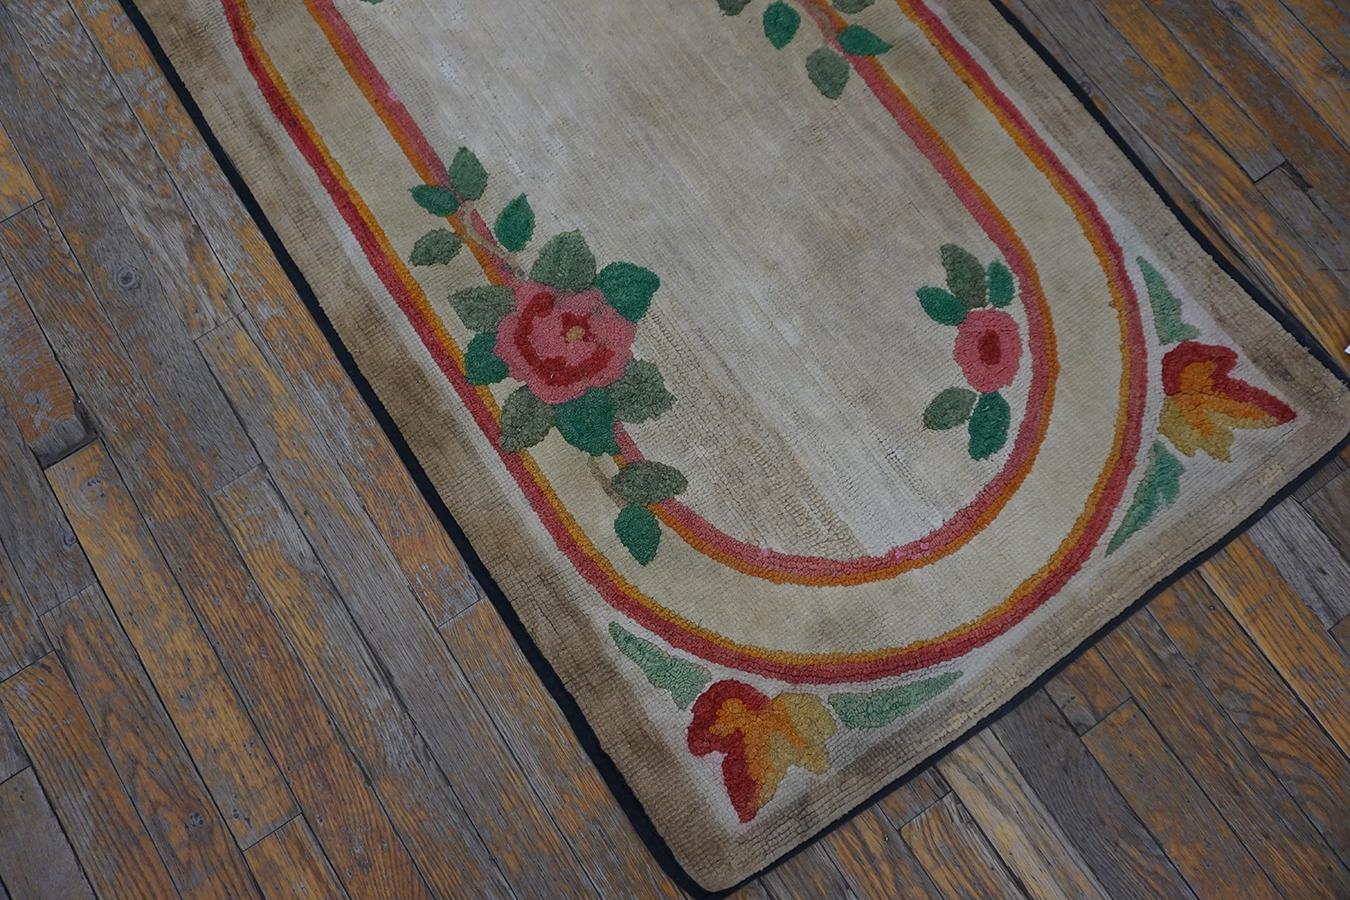 Hand-Woven Early 20th Century American Hooked Rug ( 2'6